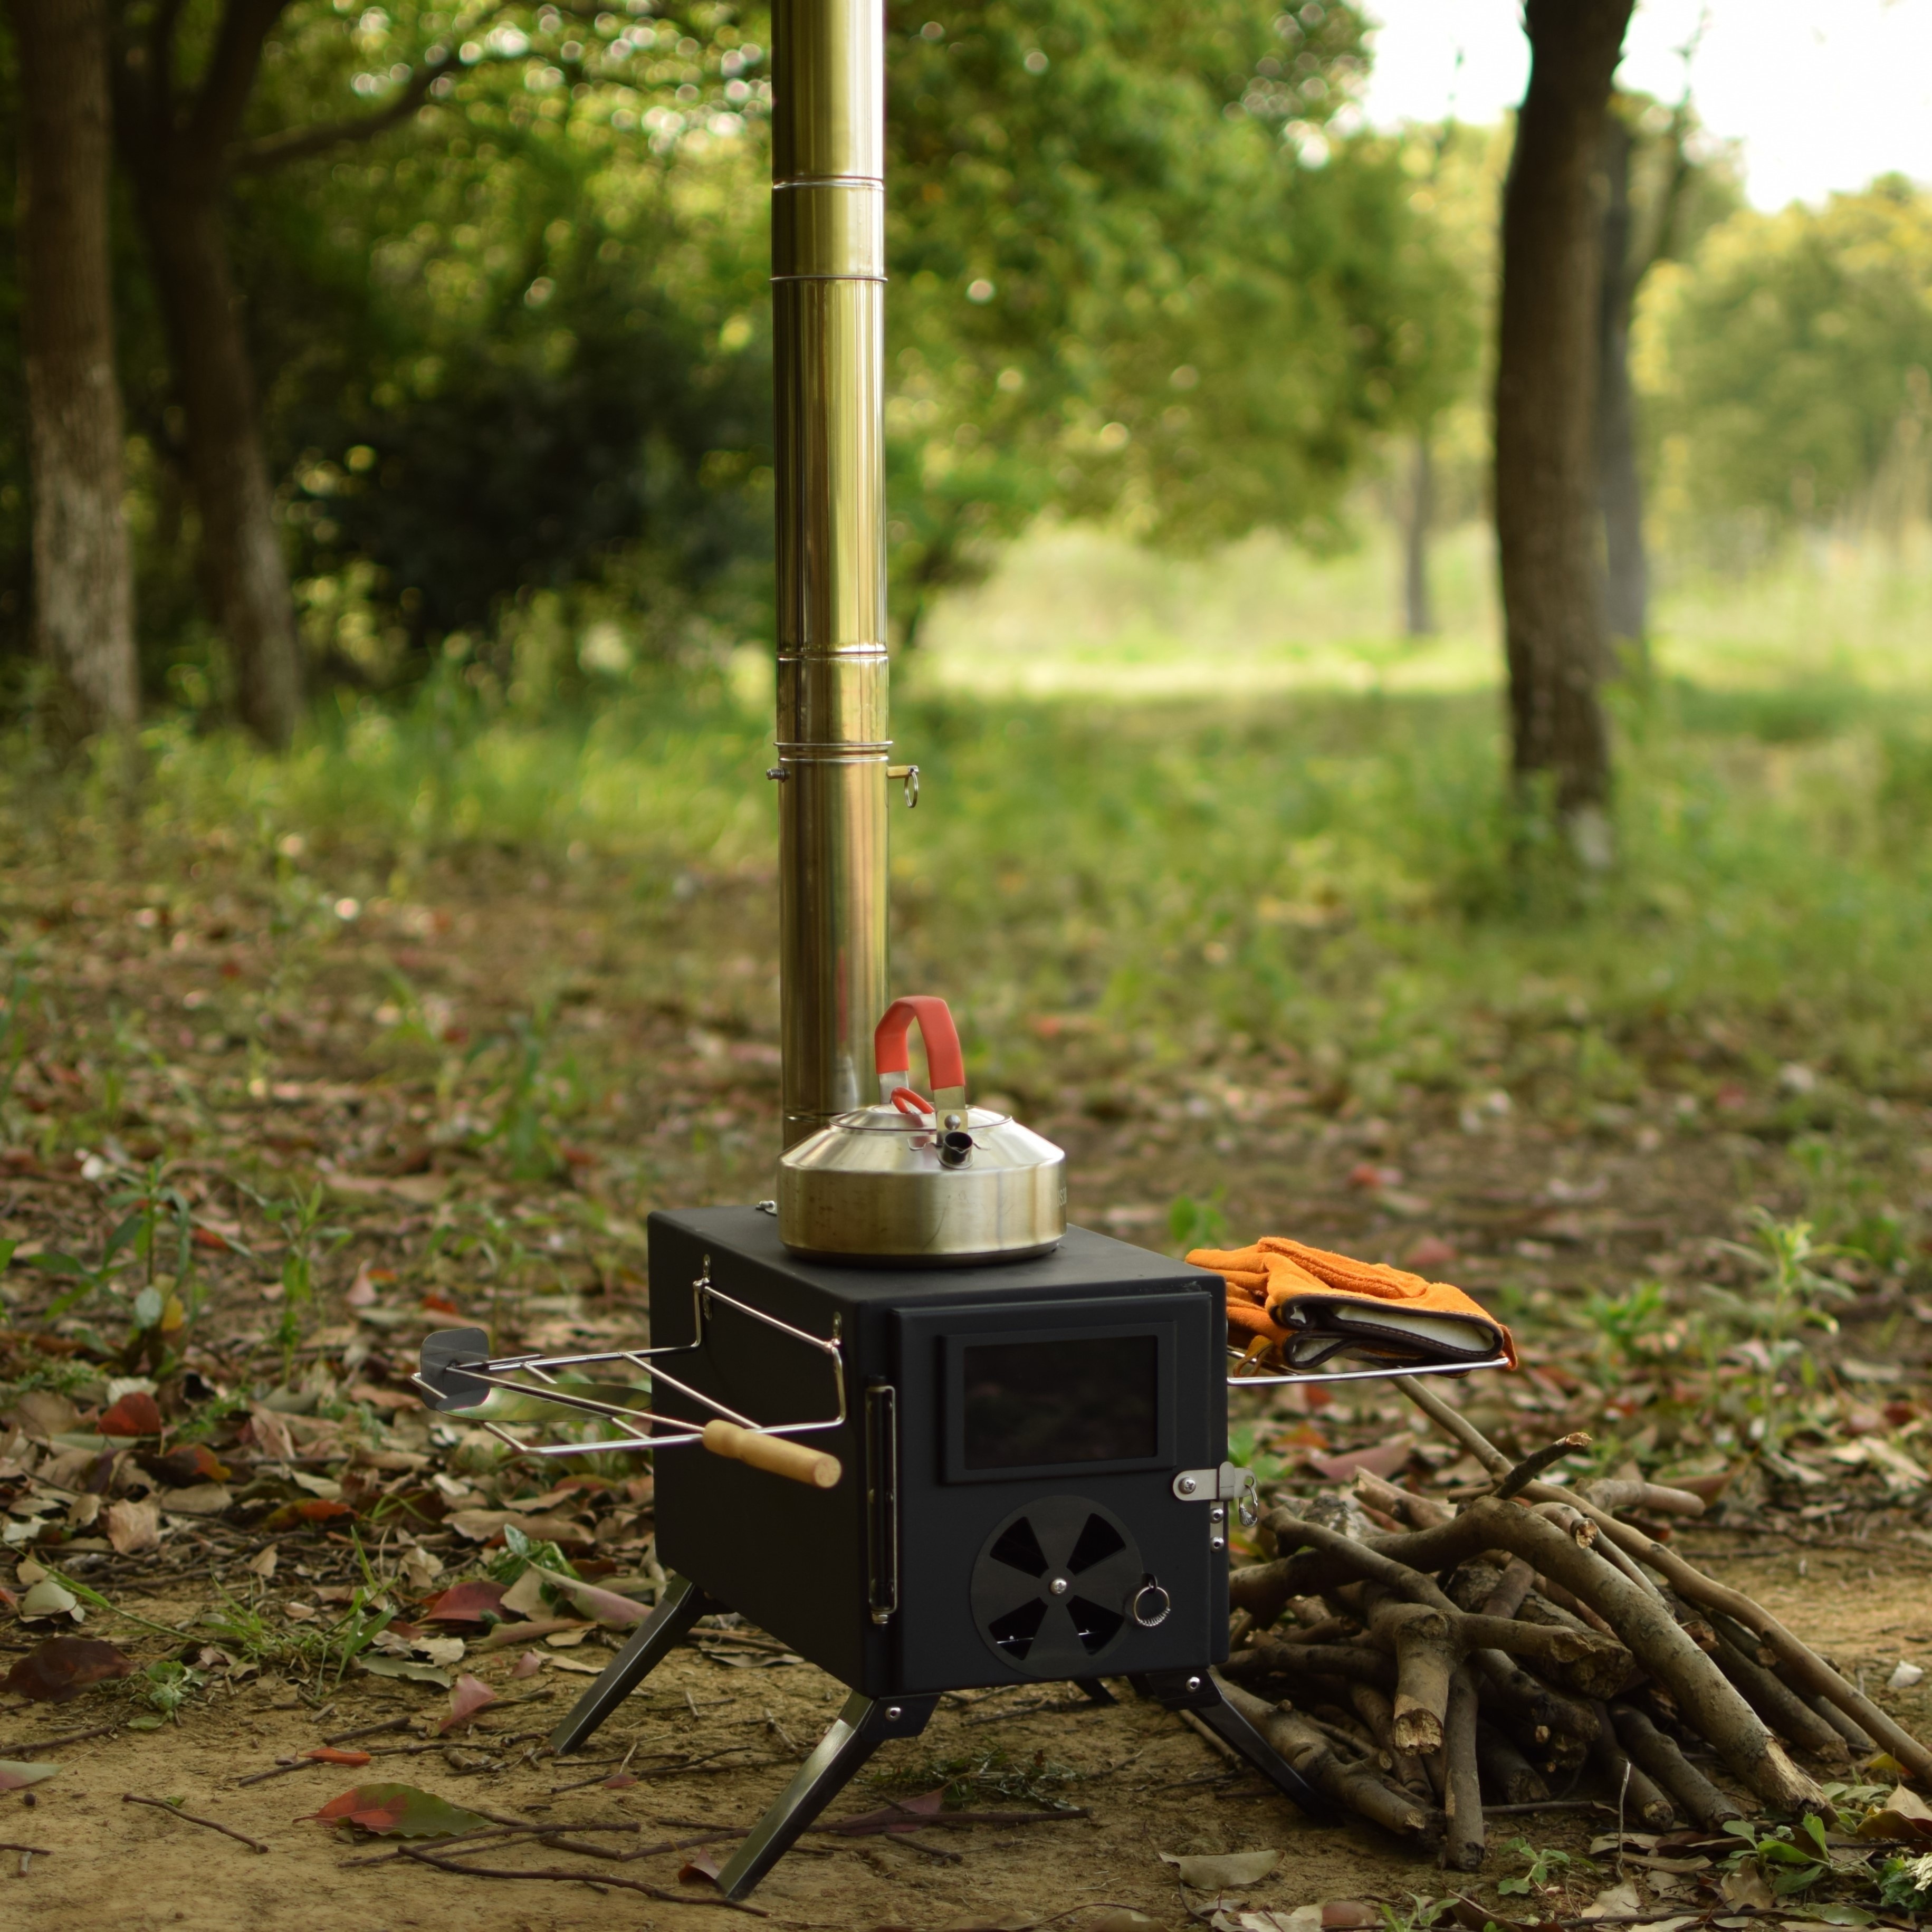 Portable Outdoor Wood Burning Fire Stove for Camping Hot Tent